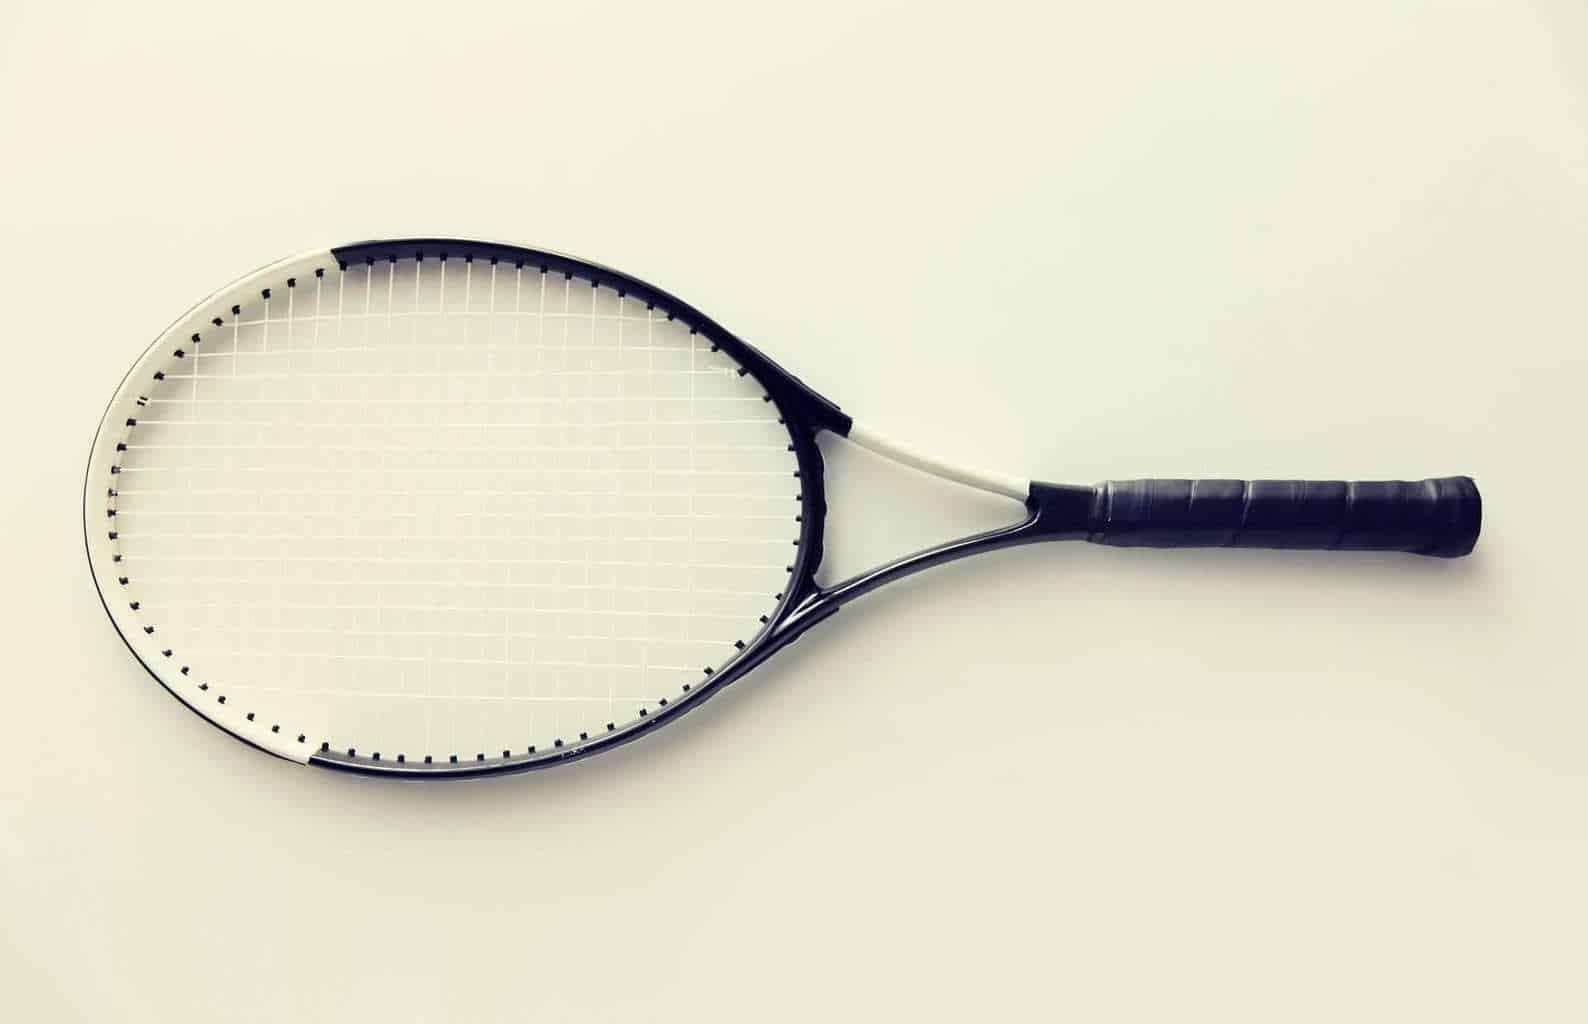 Things To Know Before Buying A Tennis Racket - Buying Guide